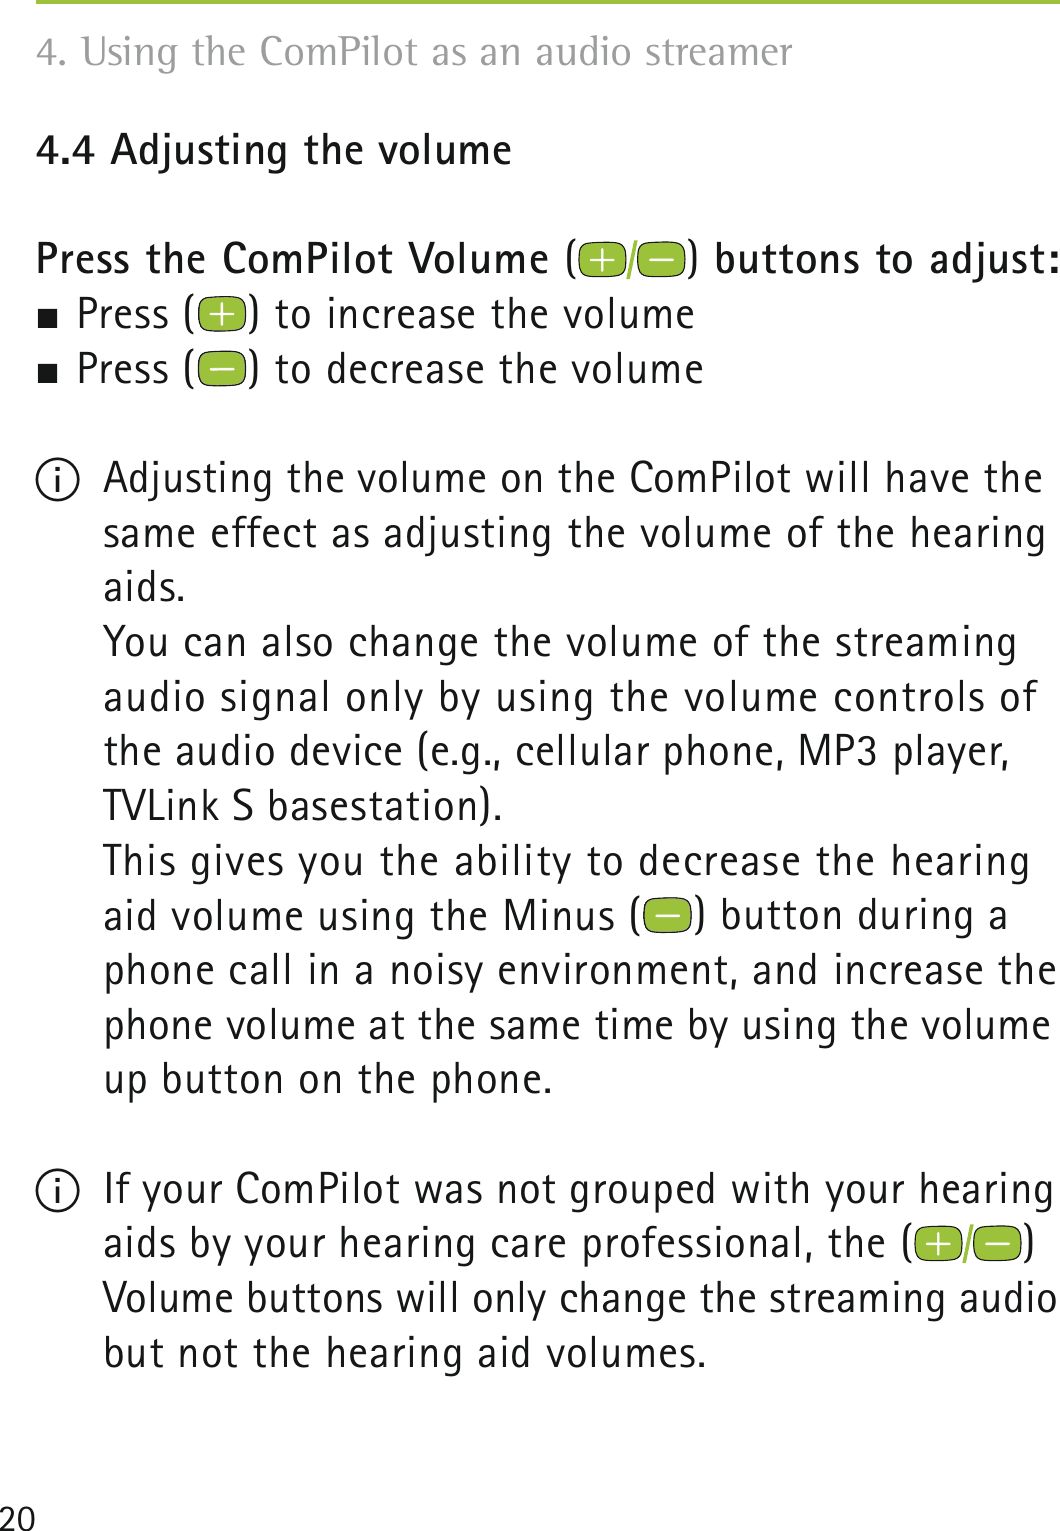 204.4 Adjusting the volume Press the ComPilot Volume () buttons to adjust: Press ( ) to increase the volume Press ( ) to decrease the volumeI  Adjusting the volume on the ComPilot will have the same effect as adjusting the volume of the hearing aids.    You can also change the volume of the streaming  audio signal only by using the volume controls of the audio device (e.g., cellular phone, MP3 player,  TVLink S basestation).    This gives you the ability to decrease the hearing aid volume using the Minus ( ) button during a phone call in a noisy environment, and increase the phone volume at the same time by using the volume up button on the phone.I  If your ComPilot was not grouped with your hearing aids by your hearing care professional, the ( )  Volume buttons will only change the streaming audio but not the hearing aid volumes.4. Using the ComPilot as an audio streamer 